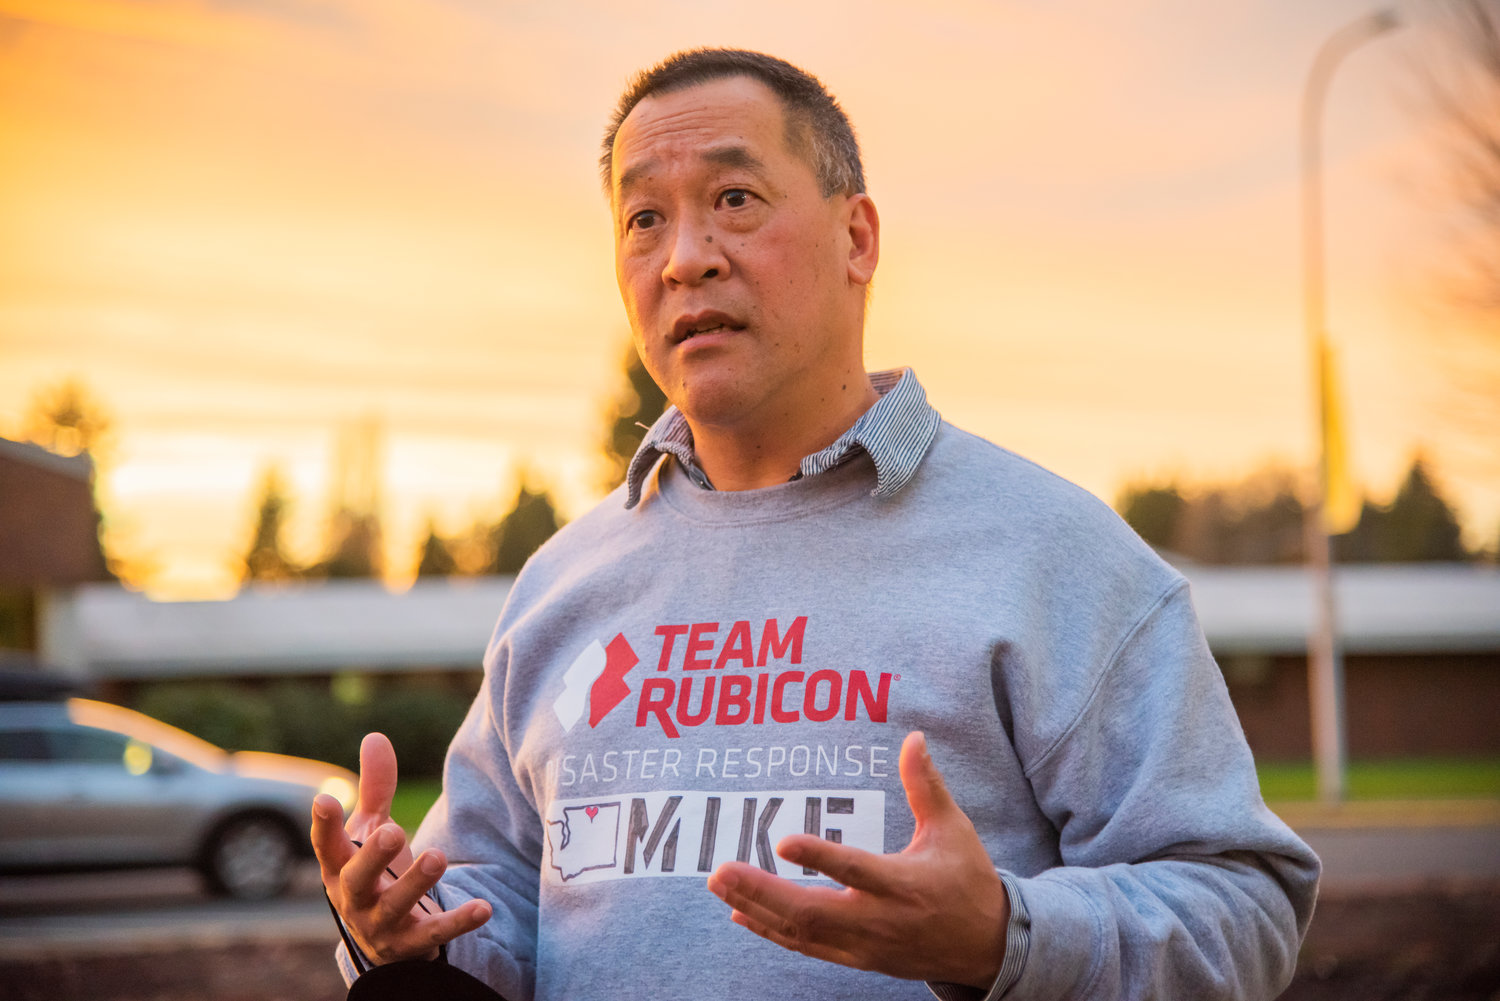 Michael Chiu, Incident Commander for Team Rubicon, talks about the work volunteers play in Disaster Response Wednesday afternoon in Centralia.